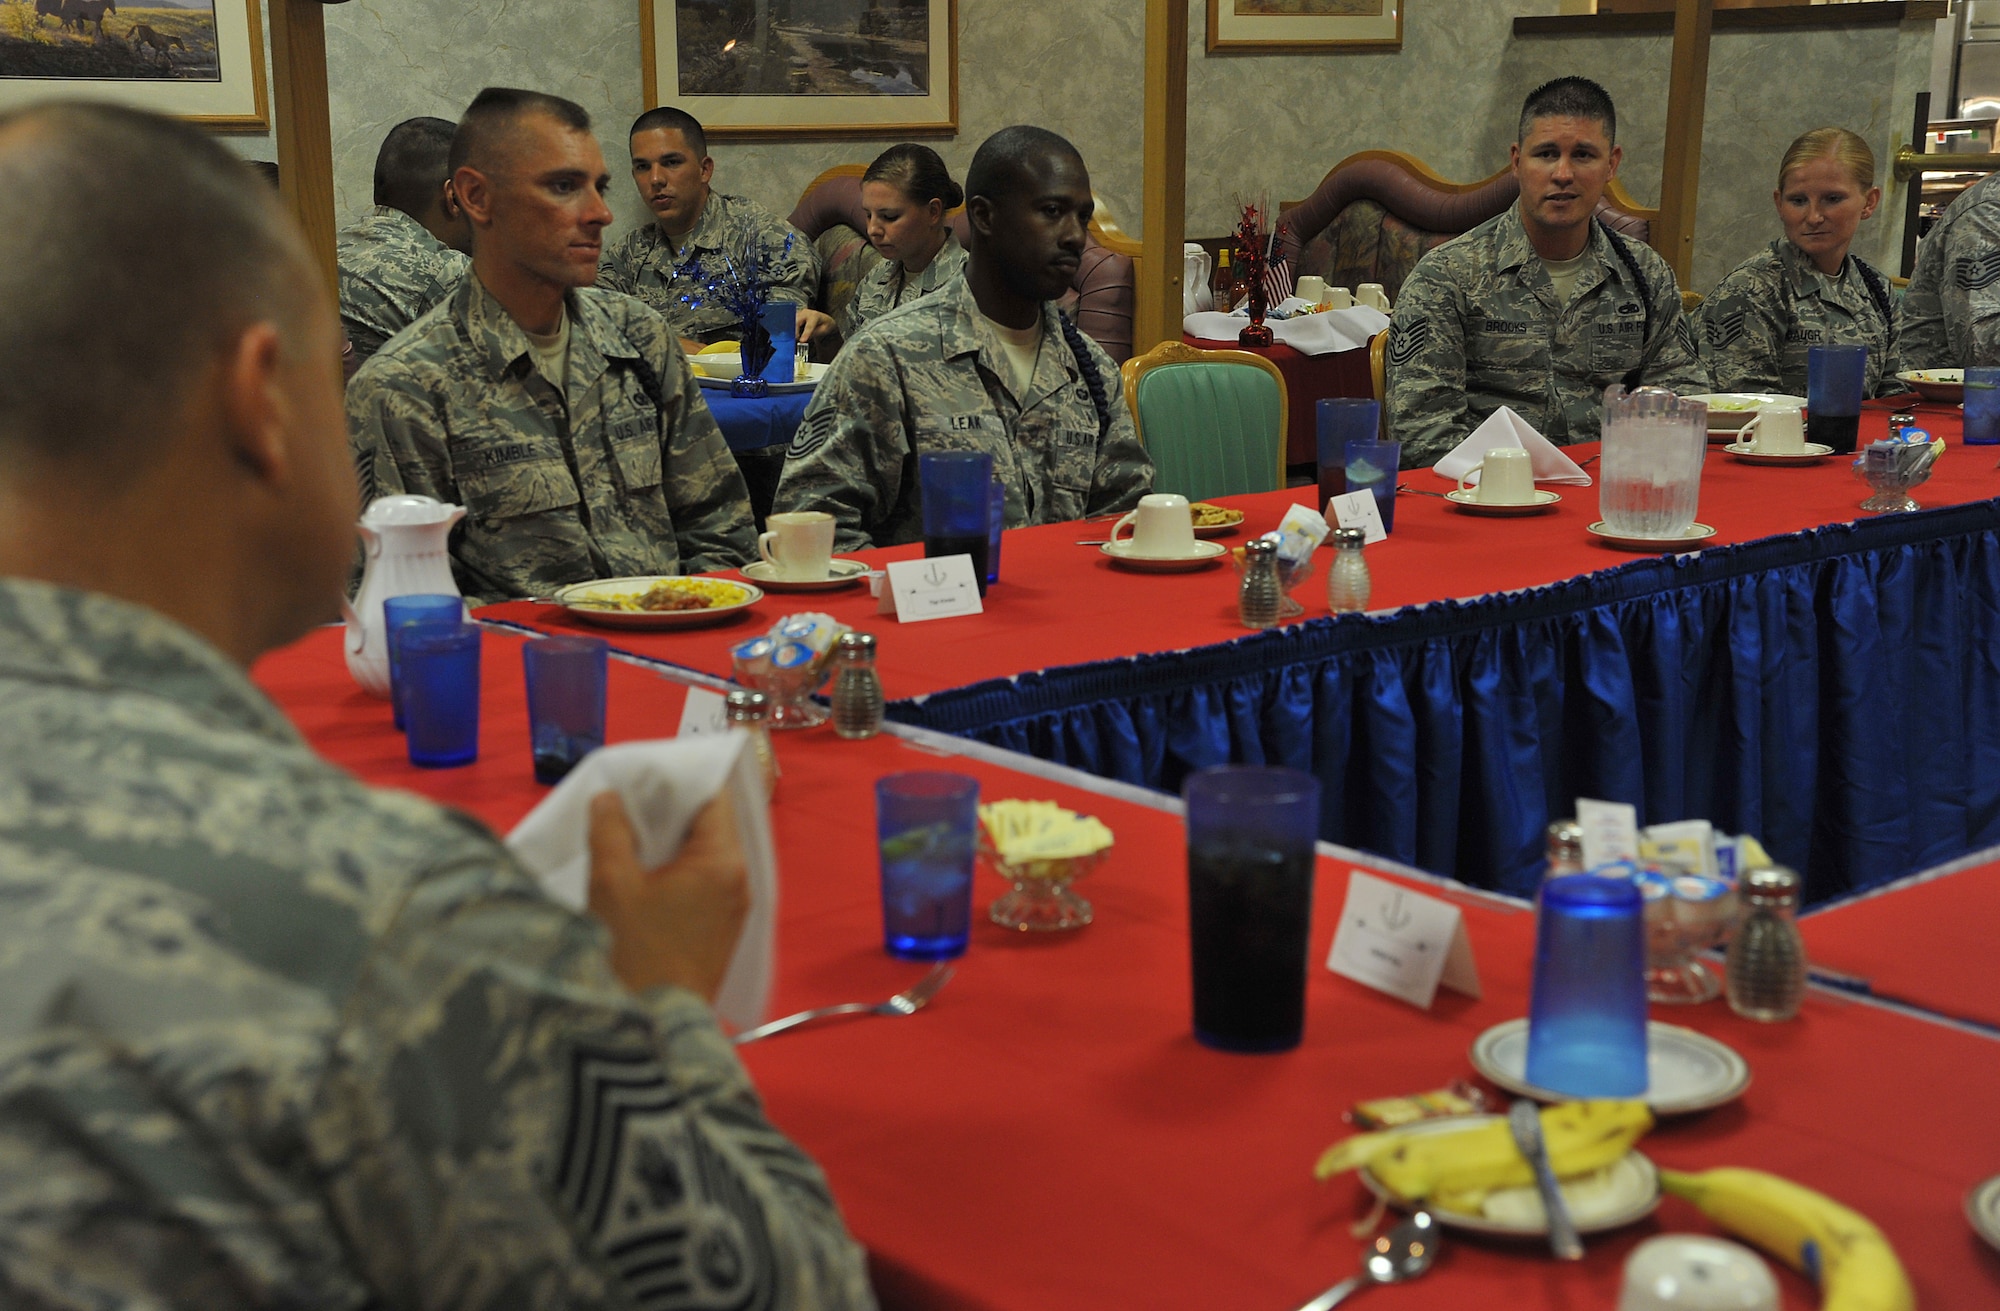 GOODFELLOW AIR FORCE BASE, Texas-- Chief Master Sgt. of the Air Force James A. Roy eats lunch with 17th Training Group Military Training Leaders Aug. 1. Roy ate lunch with the Military Training Leaders to address their concerns and share information regarding the Air Force directly from a senior enlisted leadership perspective. (U.S. Air Force Photo/Airman 1st Class Michael Smith)